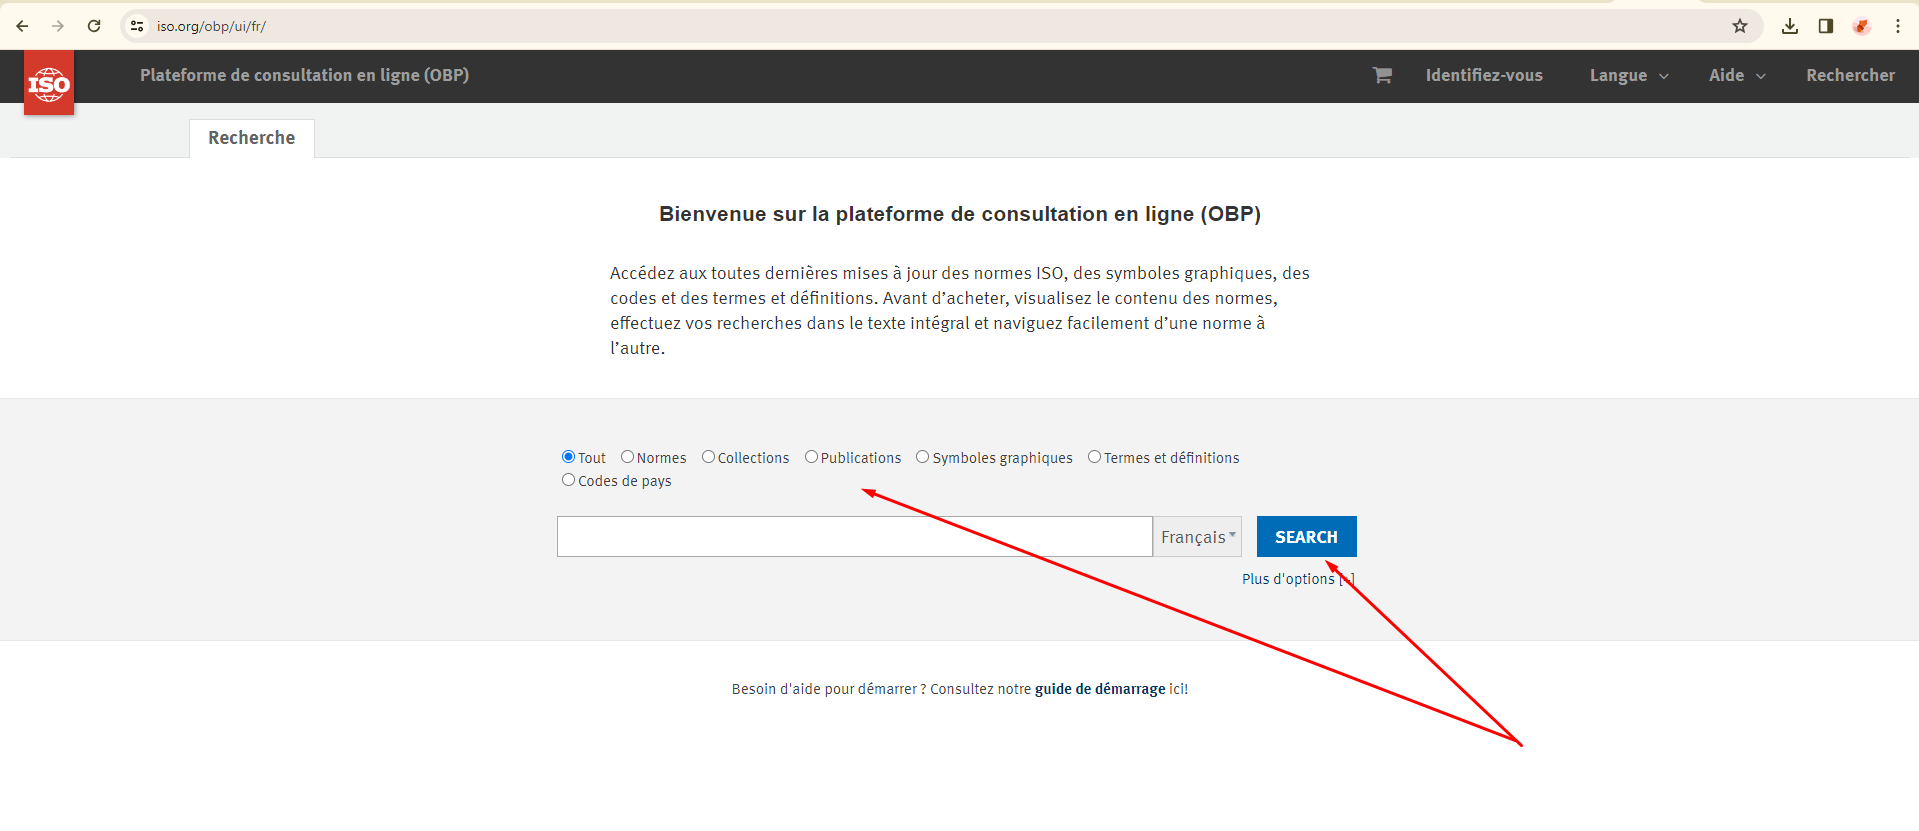 OBP page isn’t correctly translated into French